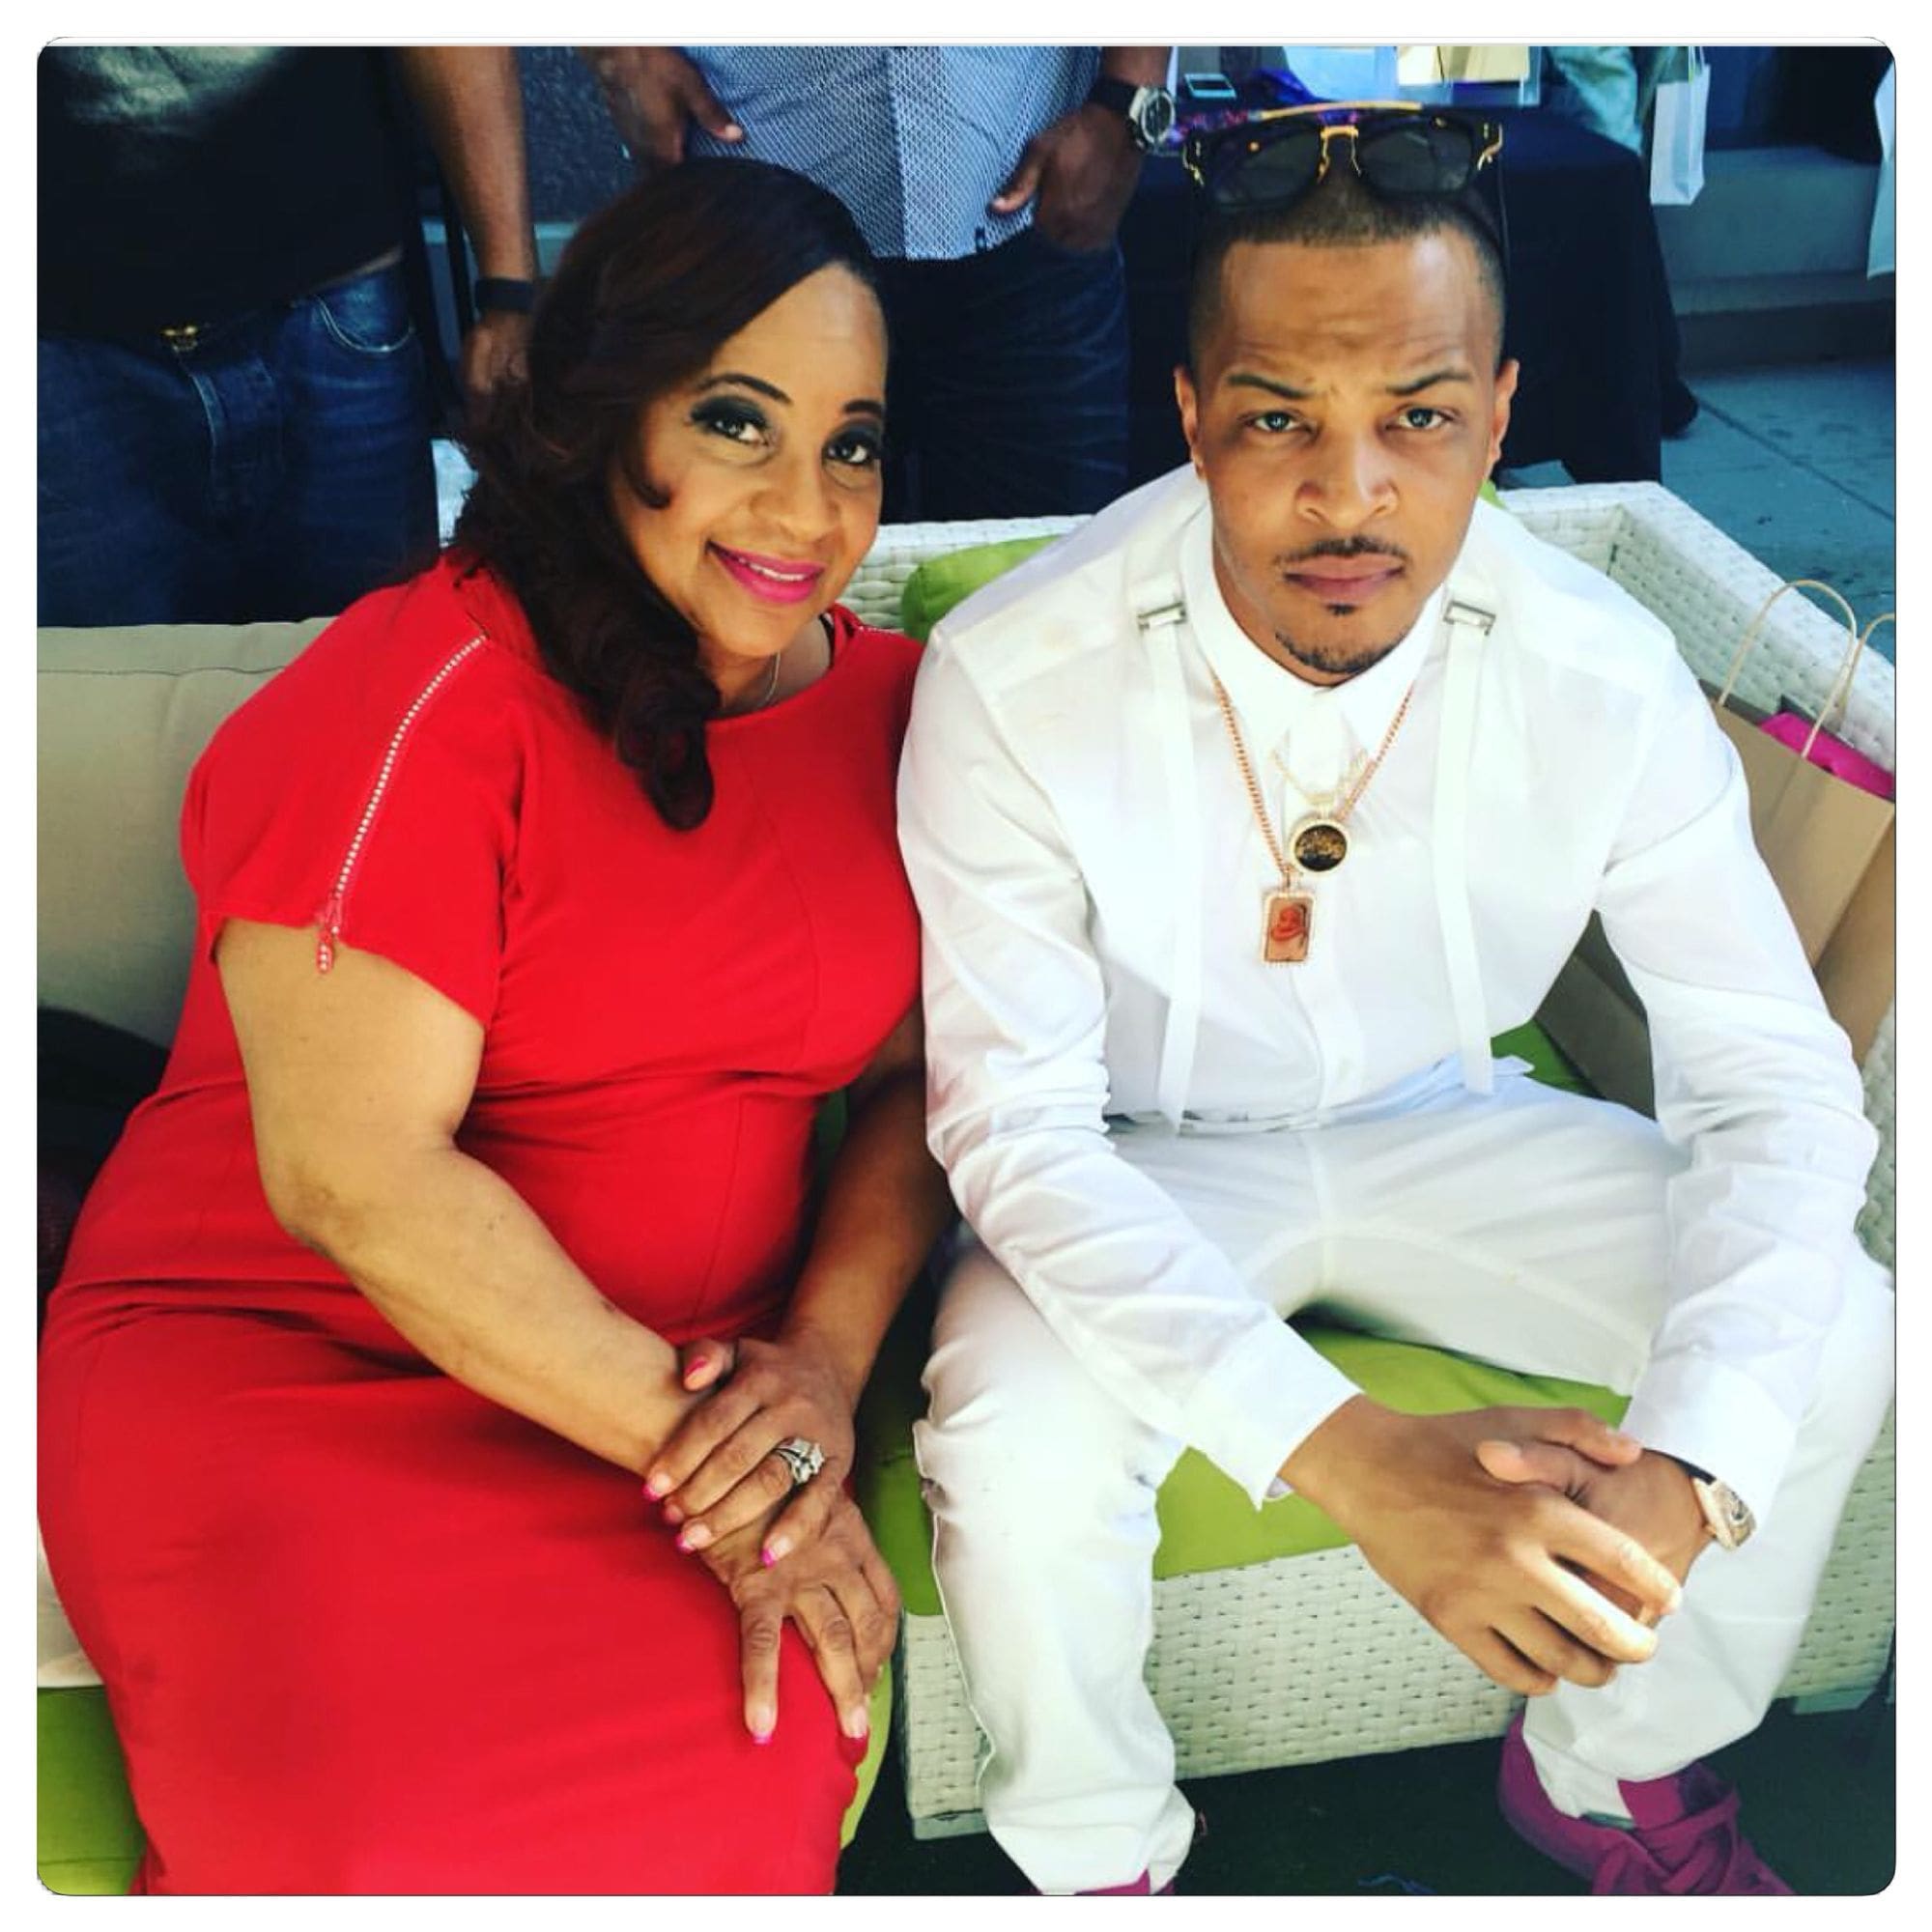 T.I. Shares A Photo Featuring Himself And His Mom, Violeta, Whom He Calls His 'Oldest Daughter'